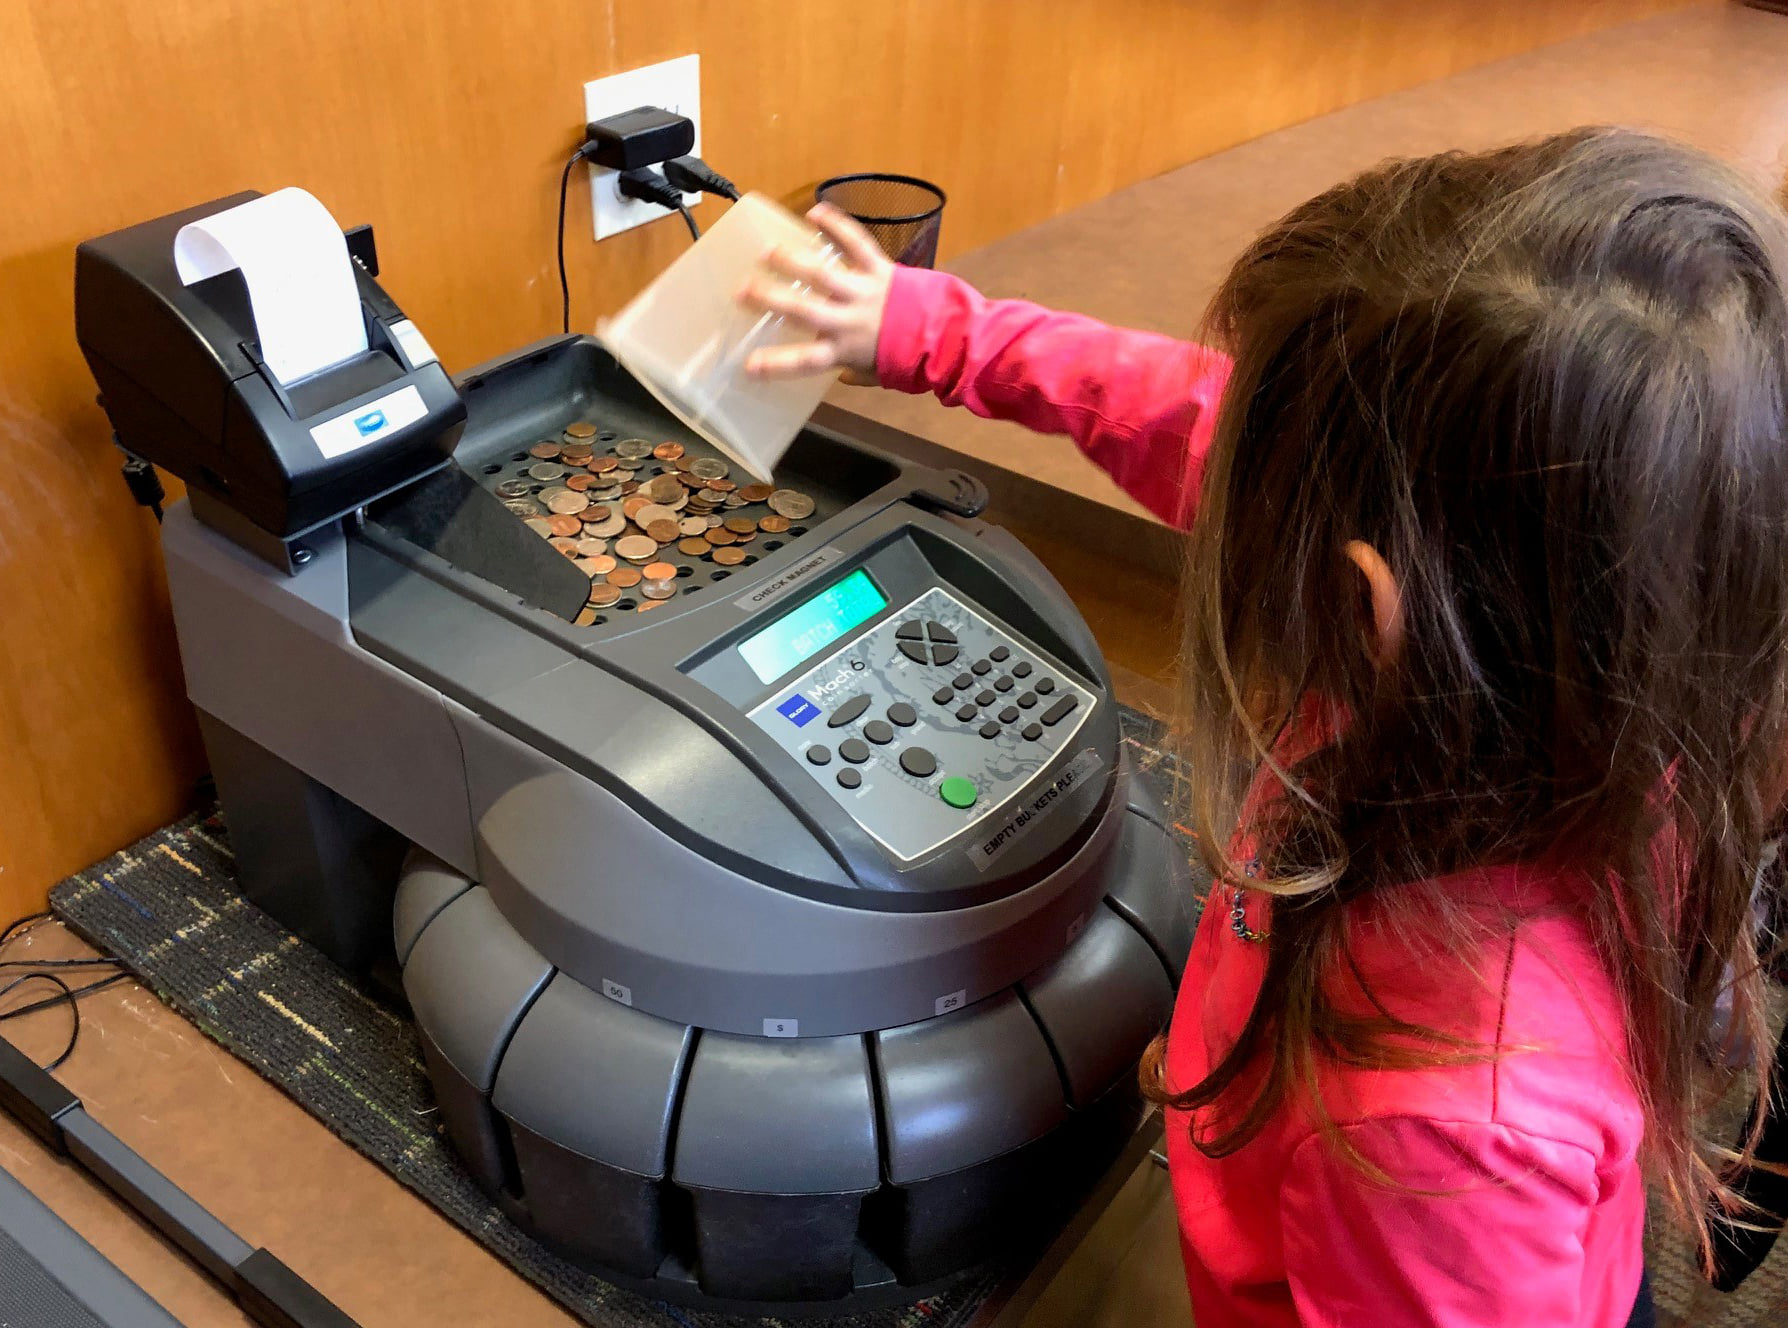 Preschool student learns how to load coin counting machine